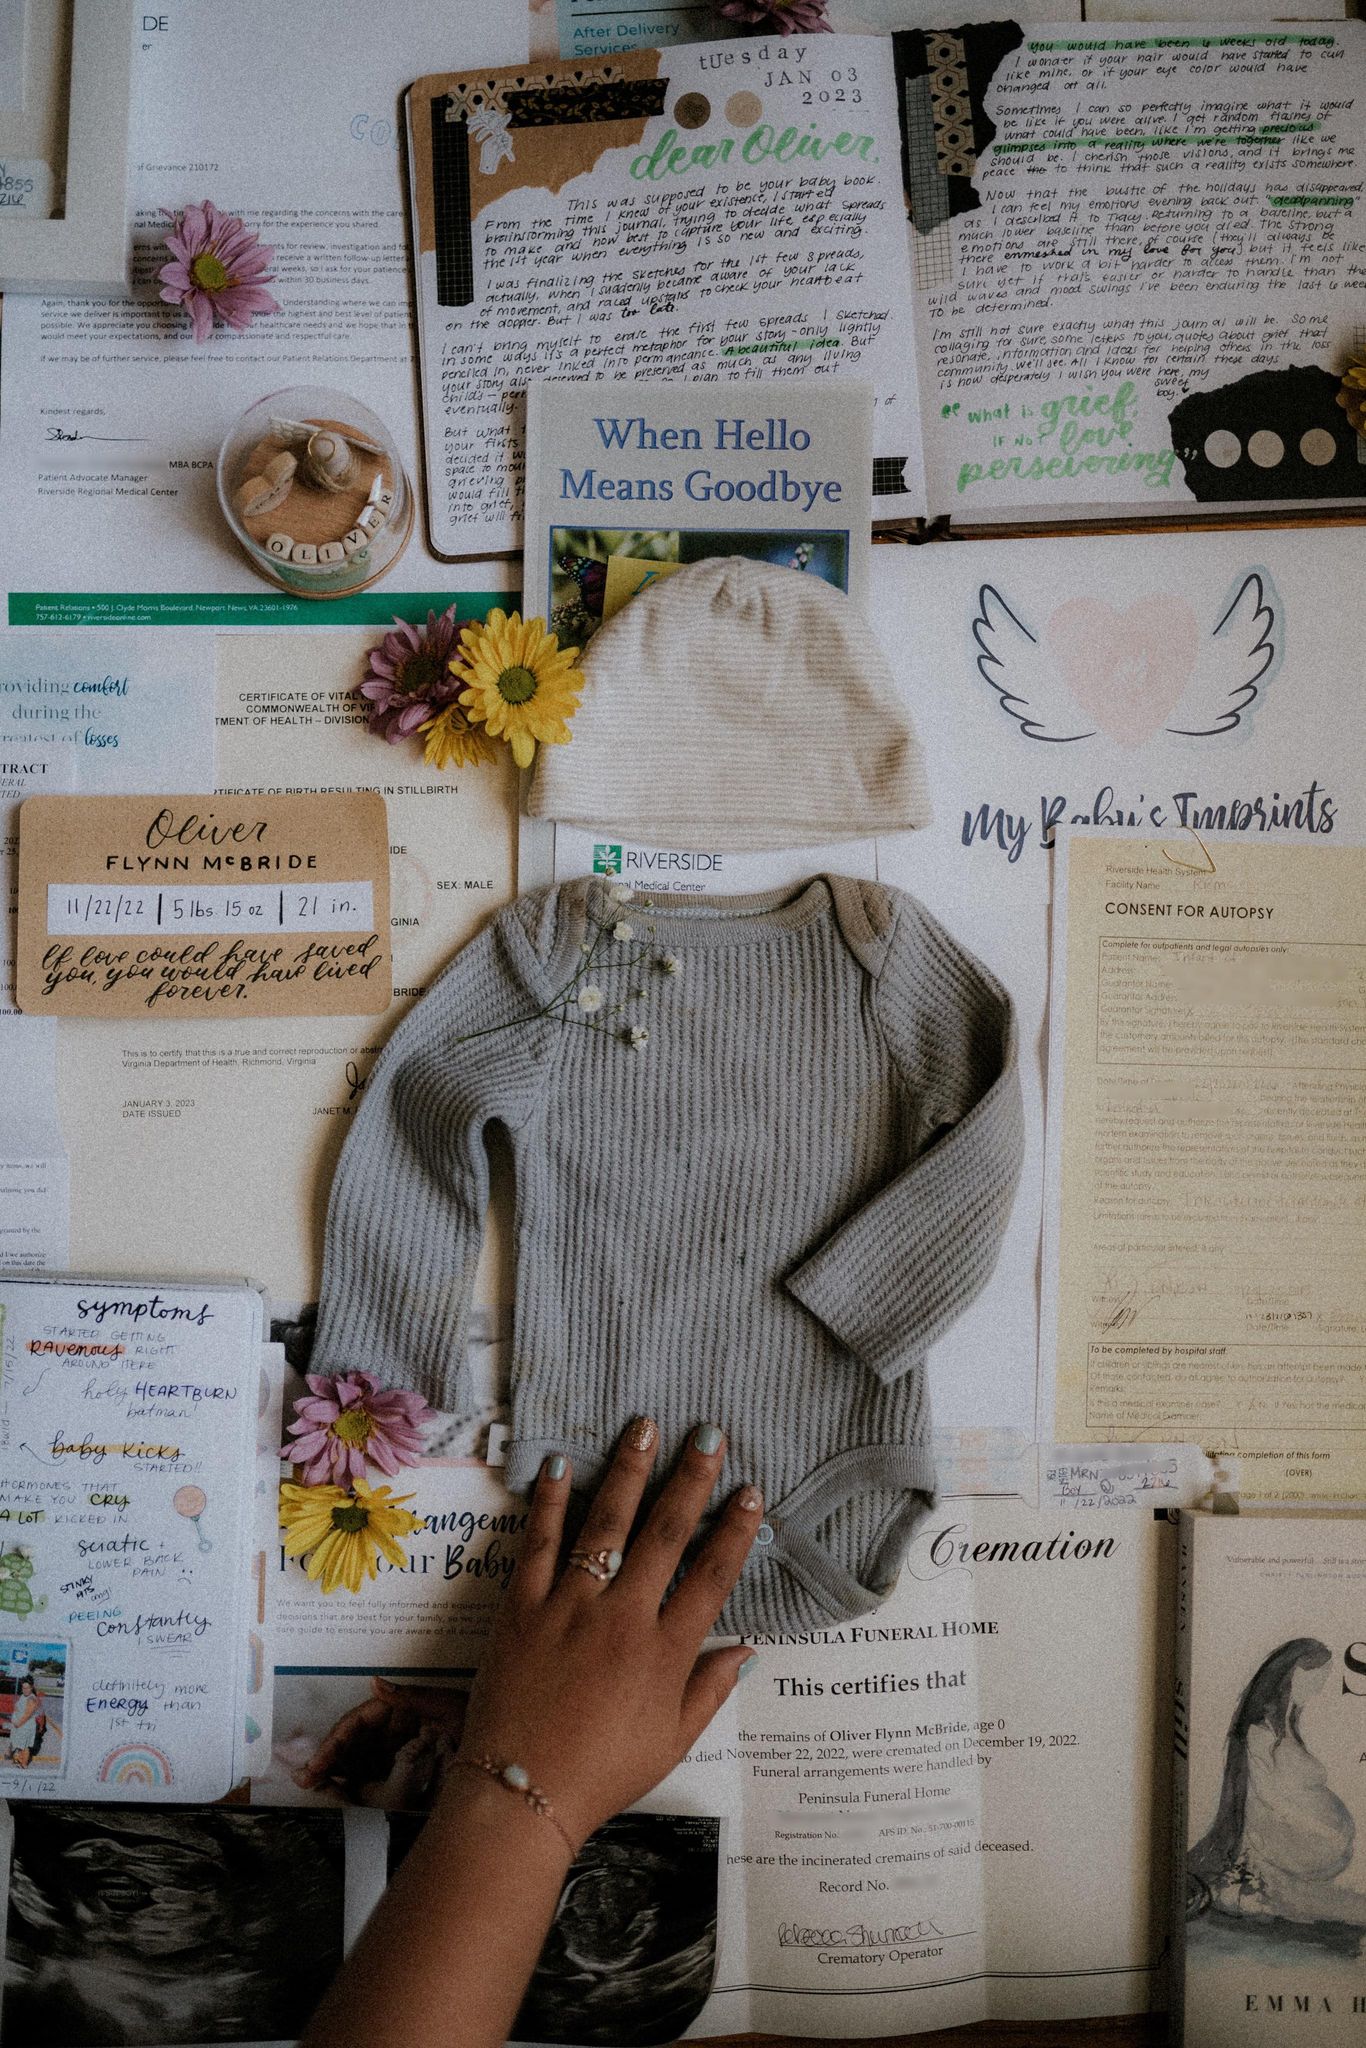 A photo highlighting grief and life after pregnancy loss, miscarriage, or stillbirth. A mother's hand with memorial jewelry has her hands on a bloodied onesies. The onesies is surrounded by various grief entries, hospital forms, books, and flowers.